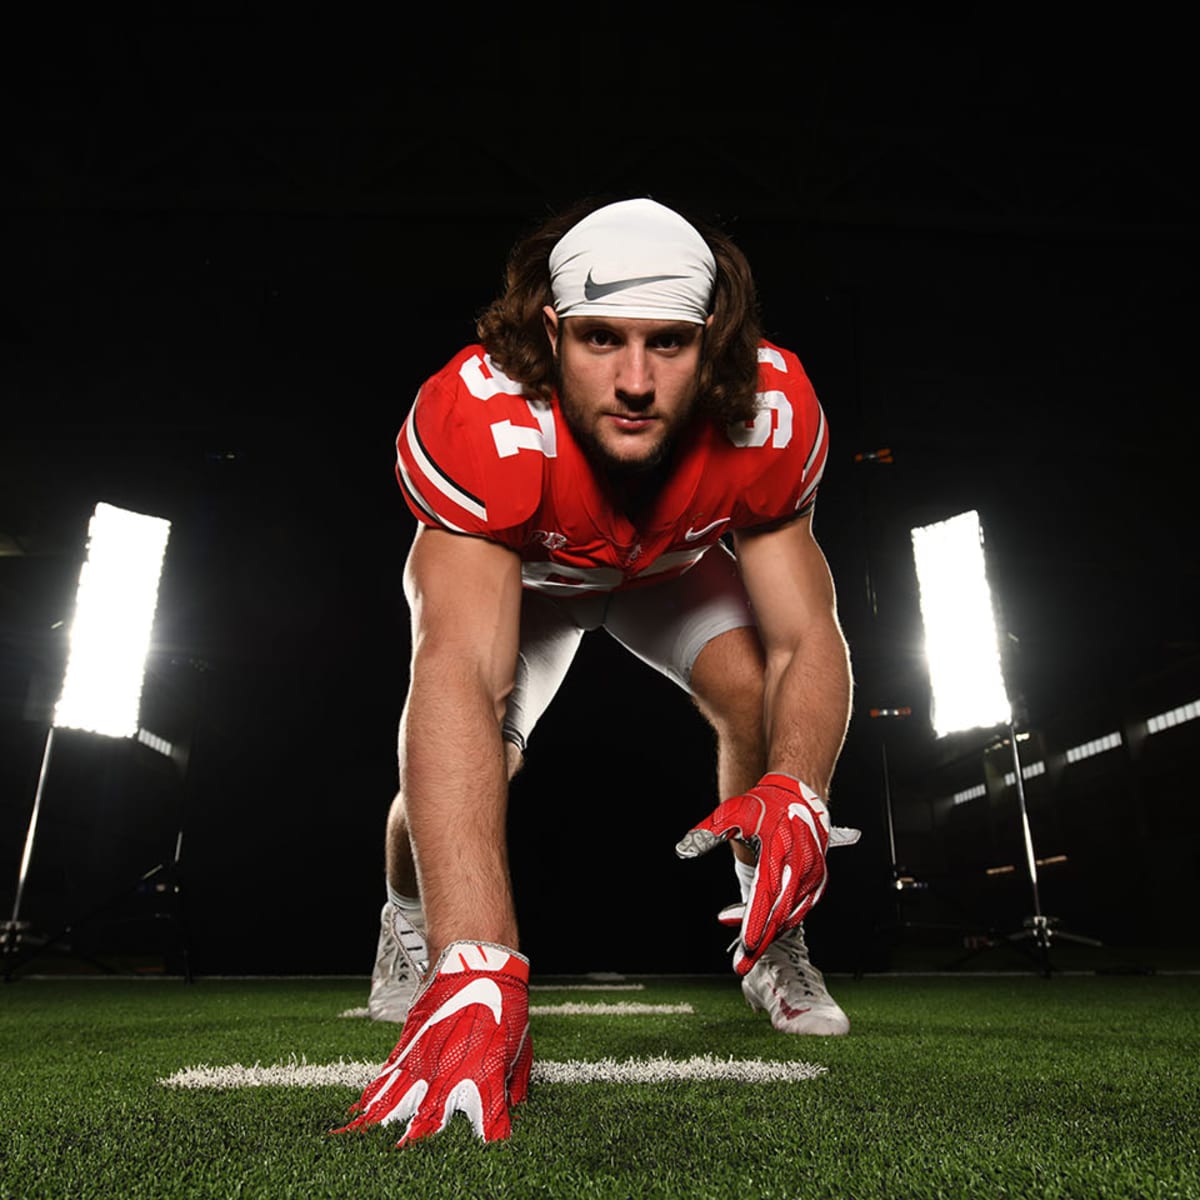 Ohio State Football: Can Nick Bosa Be Even Better Than Older